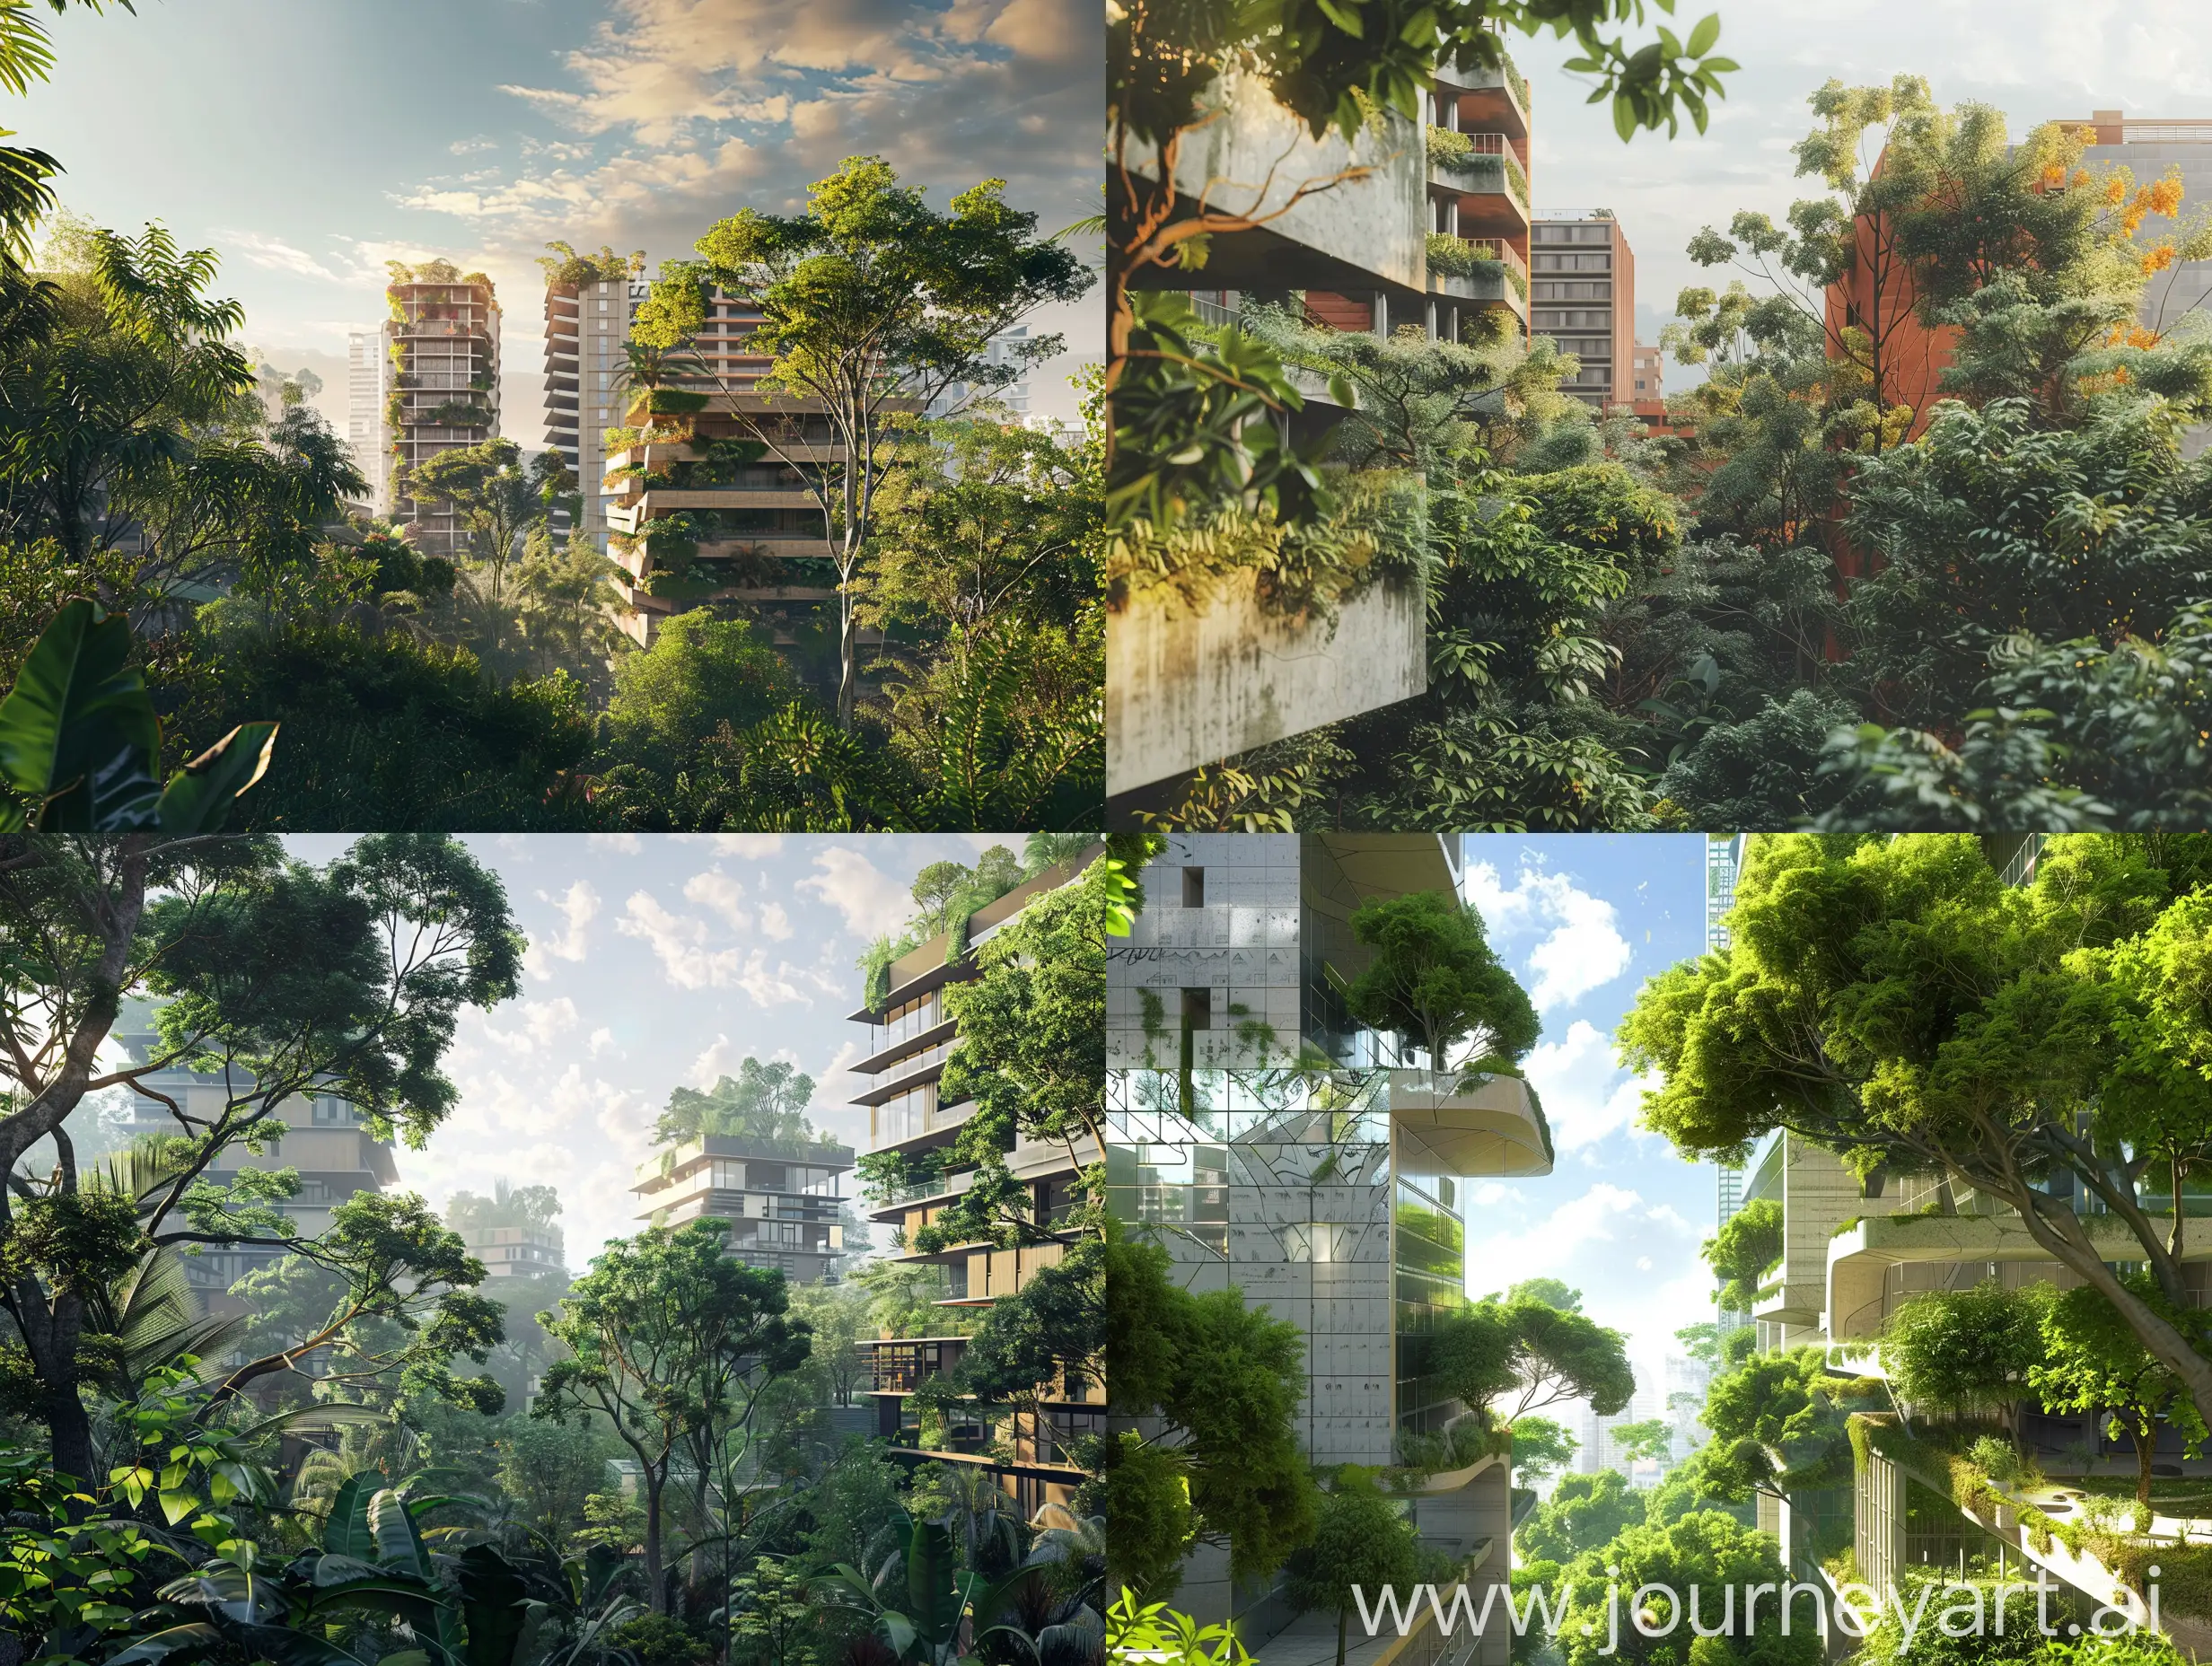 a hyperrealistic image for environmental conservation in an urban setting with trees, vegetation and a few buildings in the image